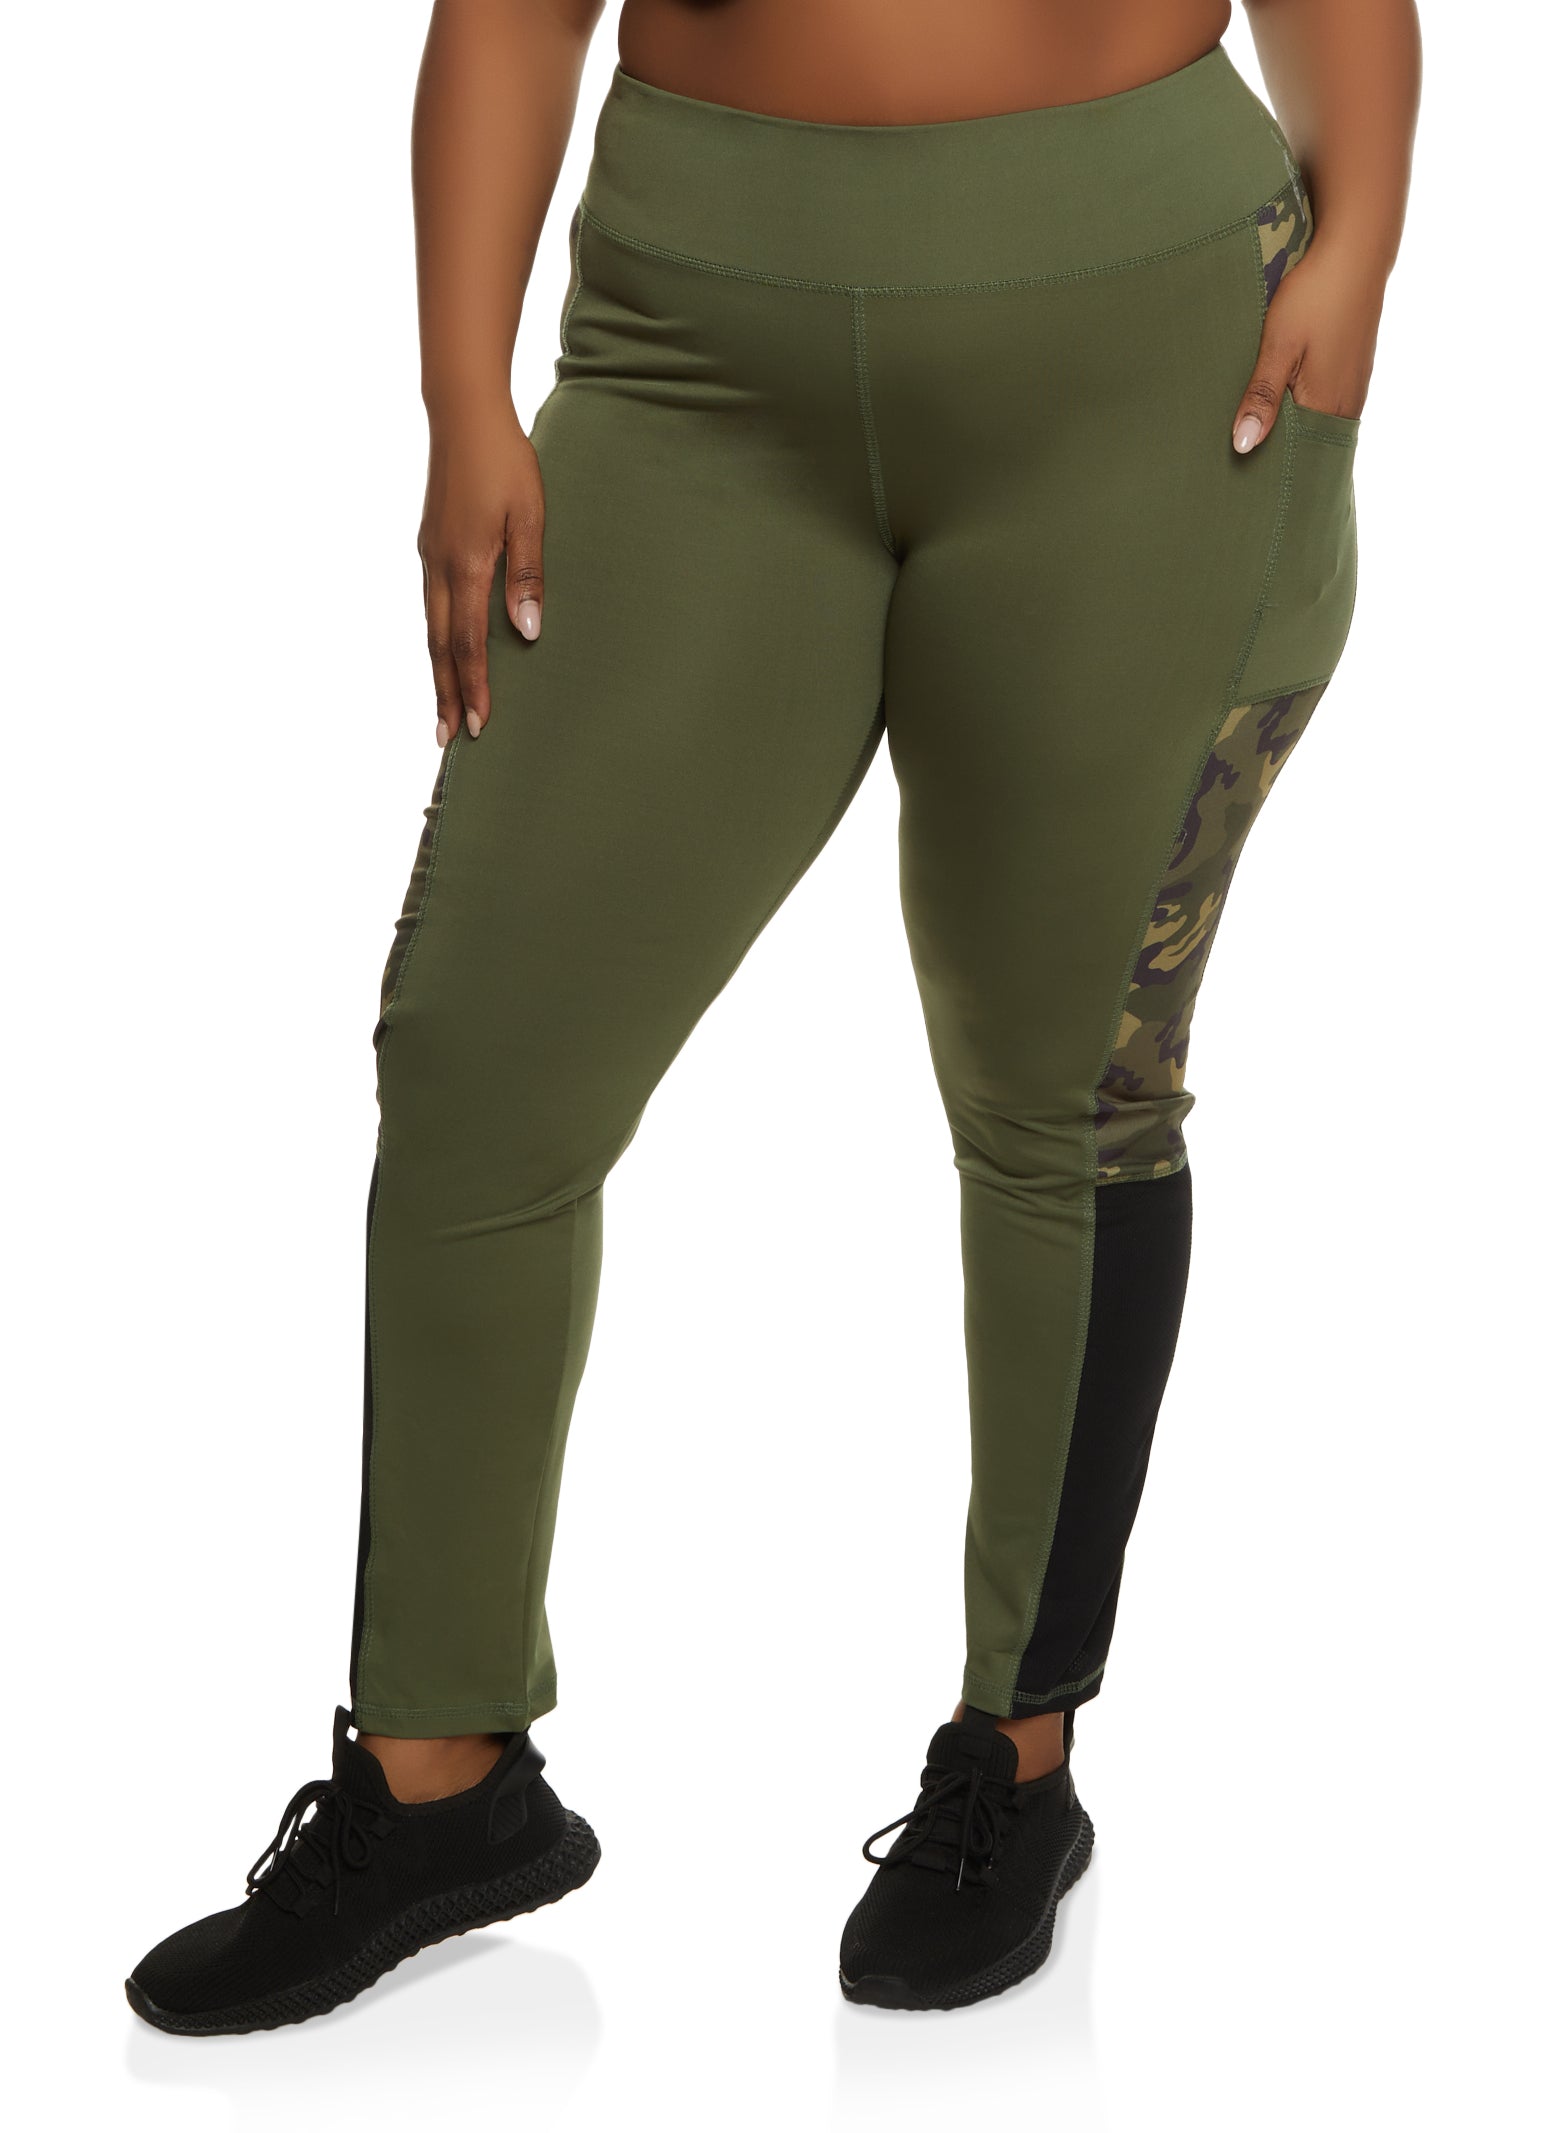 Olive-Coloured Camo Leggings with Side Pockets